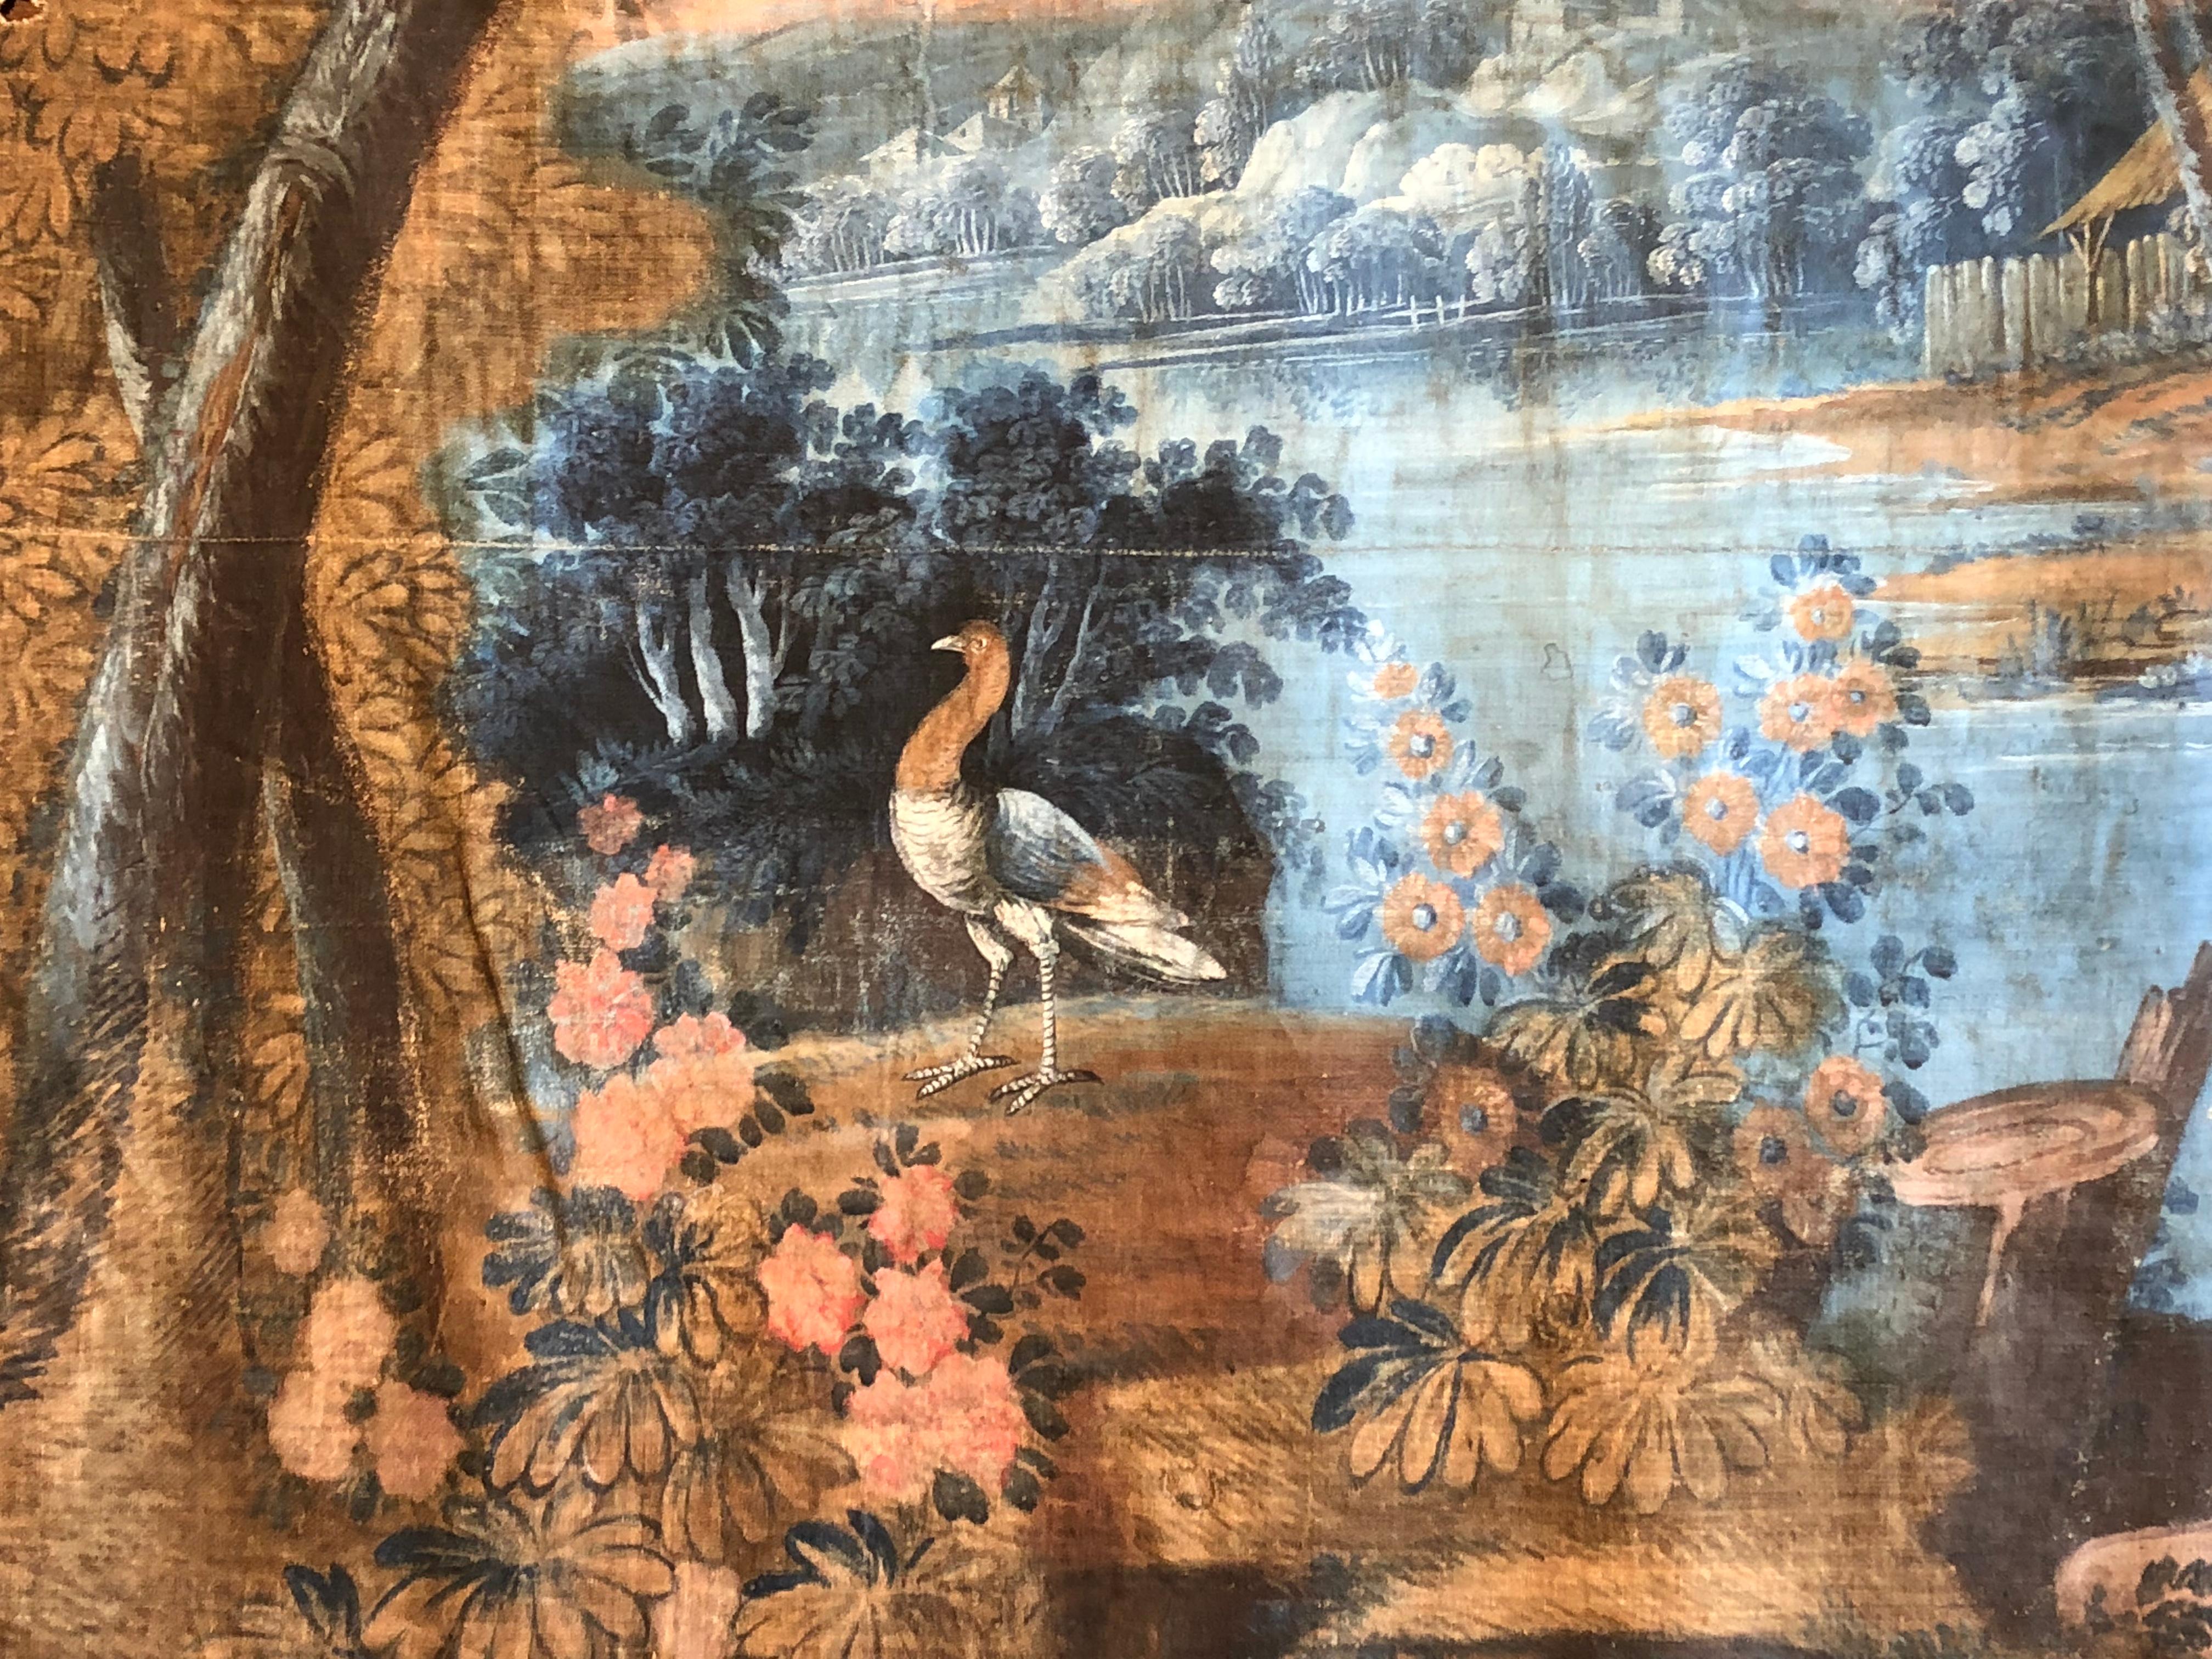 An important room-size “toile peinte” tapestry depicting a landscape with a village scene, trees, birds and flowers, attributed to the Tournemine workshops in Angers, France painted by Coulet de Beauregard, circa 1770. Similar examples, considered